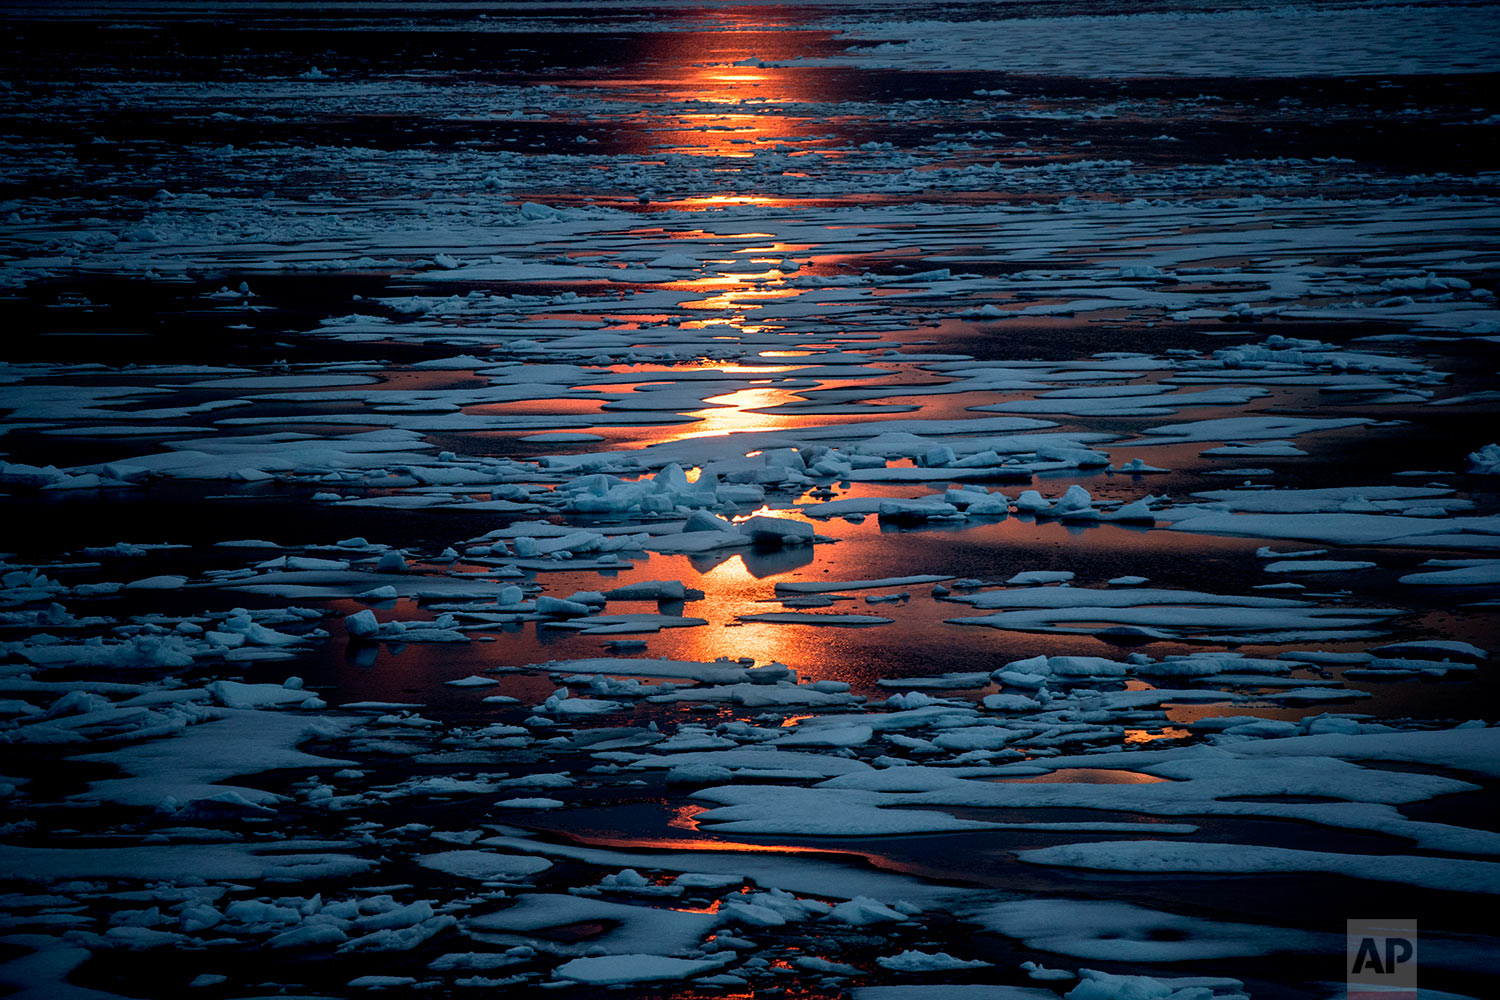  The midnight sun shines across sea ice along the Northwest Passage in the Canadian Arctic Archipelago, Sunday, July 23, 2017. The melting ice is one reason why modern ships have an easier time going through the Northwest Passage, 111 years after Nor